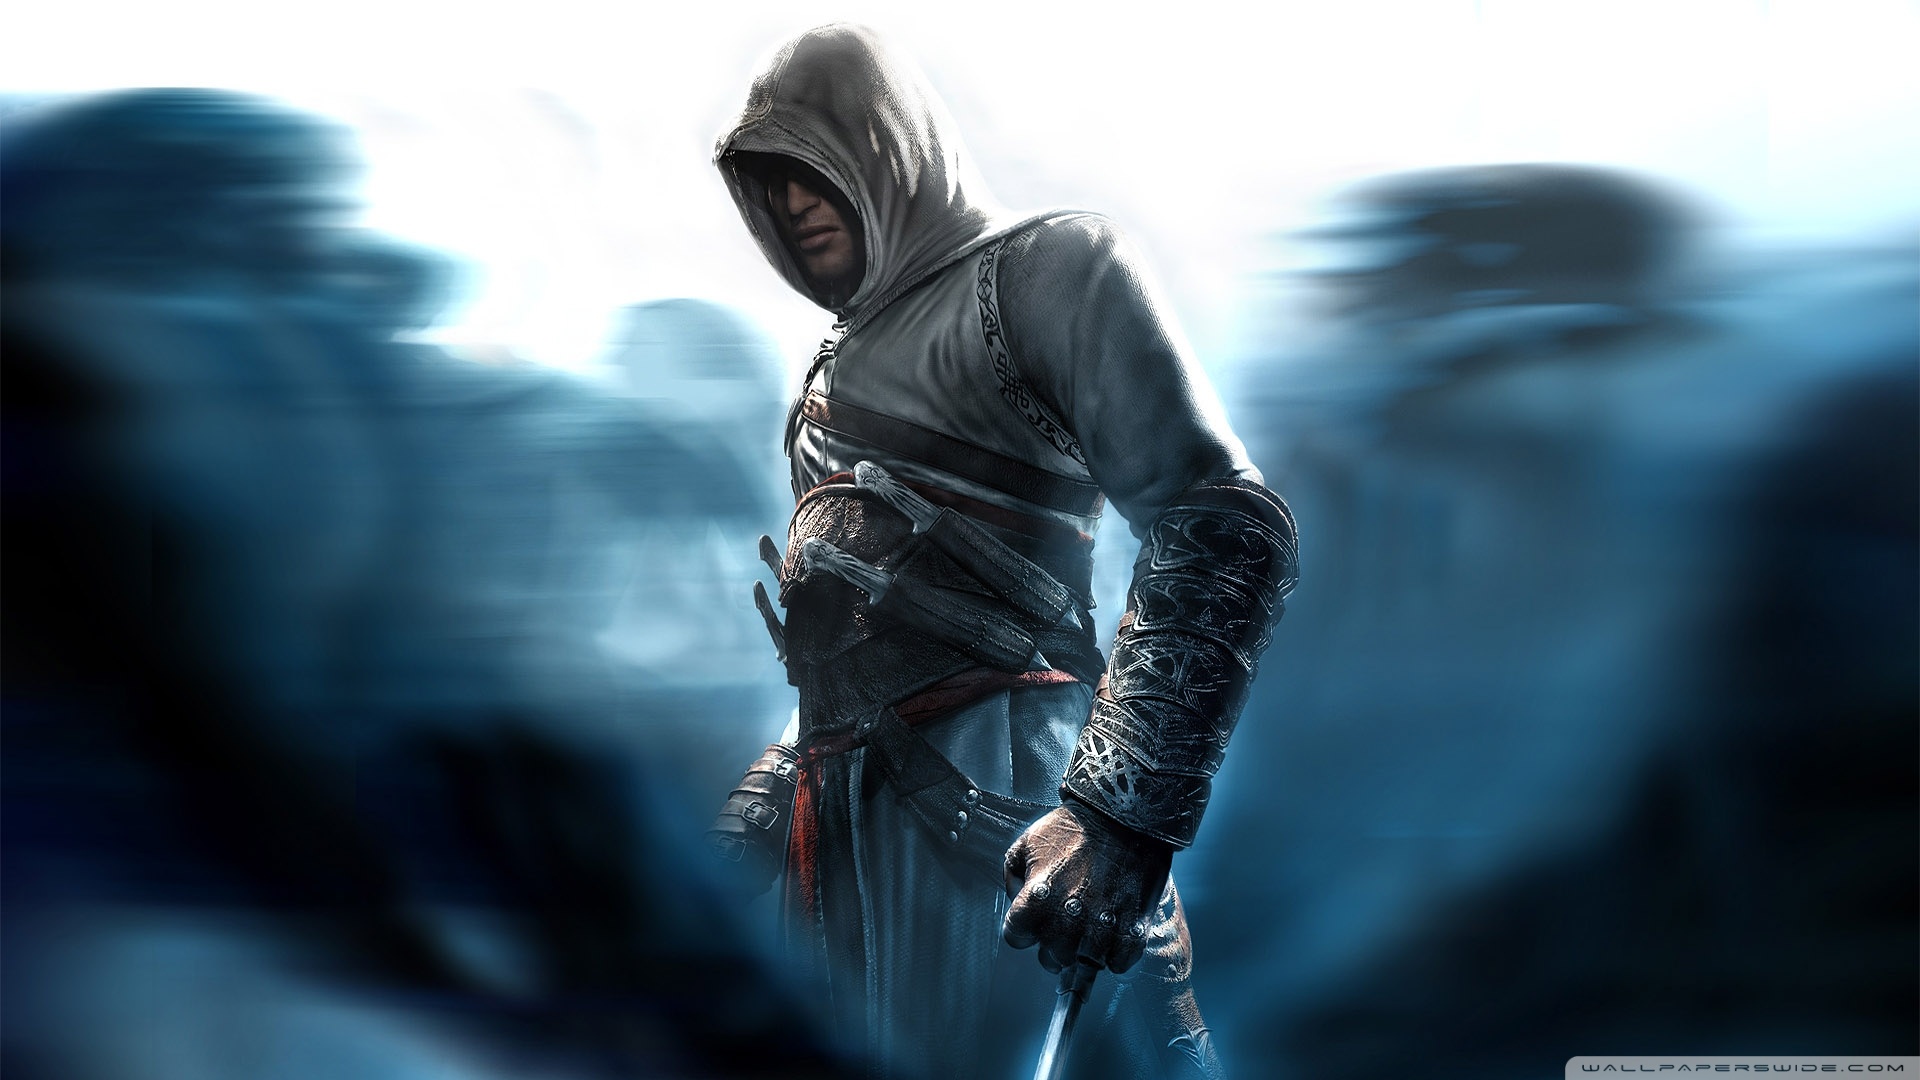 UBISOFT PLANNING TRADITIONAL ASSASSINS' CREED GAME, REPORTS SUPGGEST